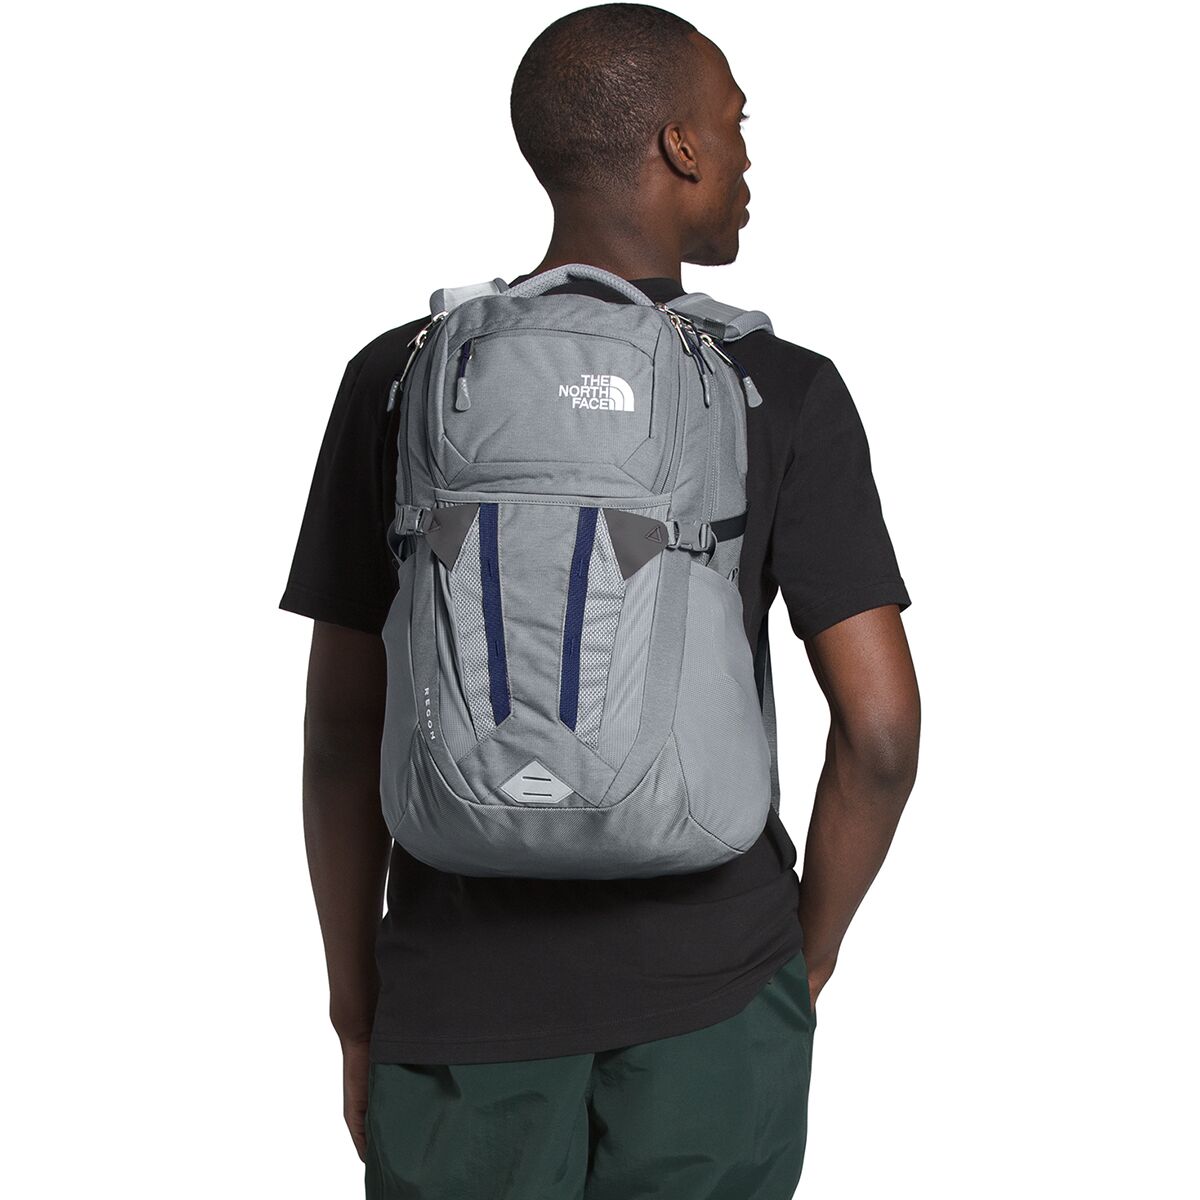 The North Face Recon 30l Backpack